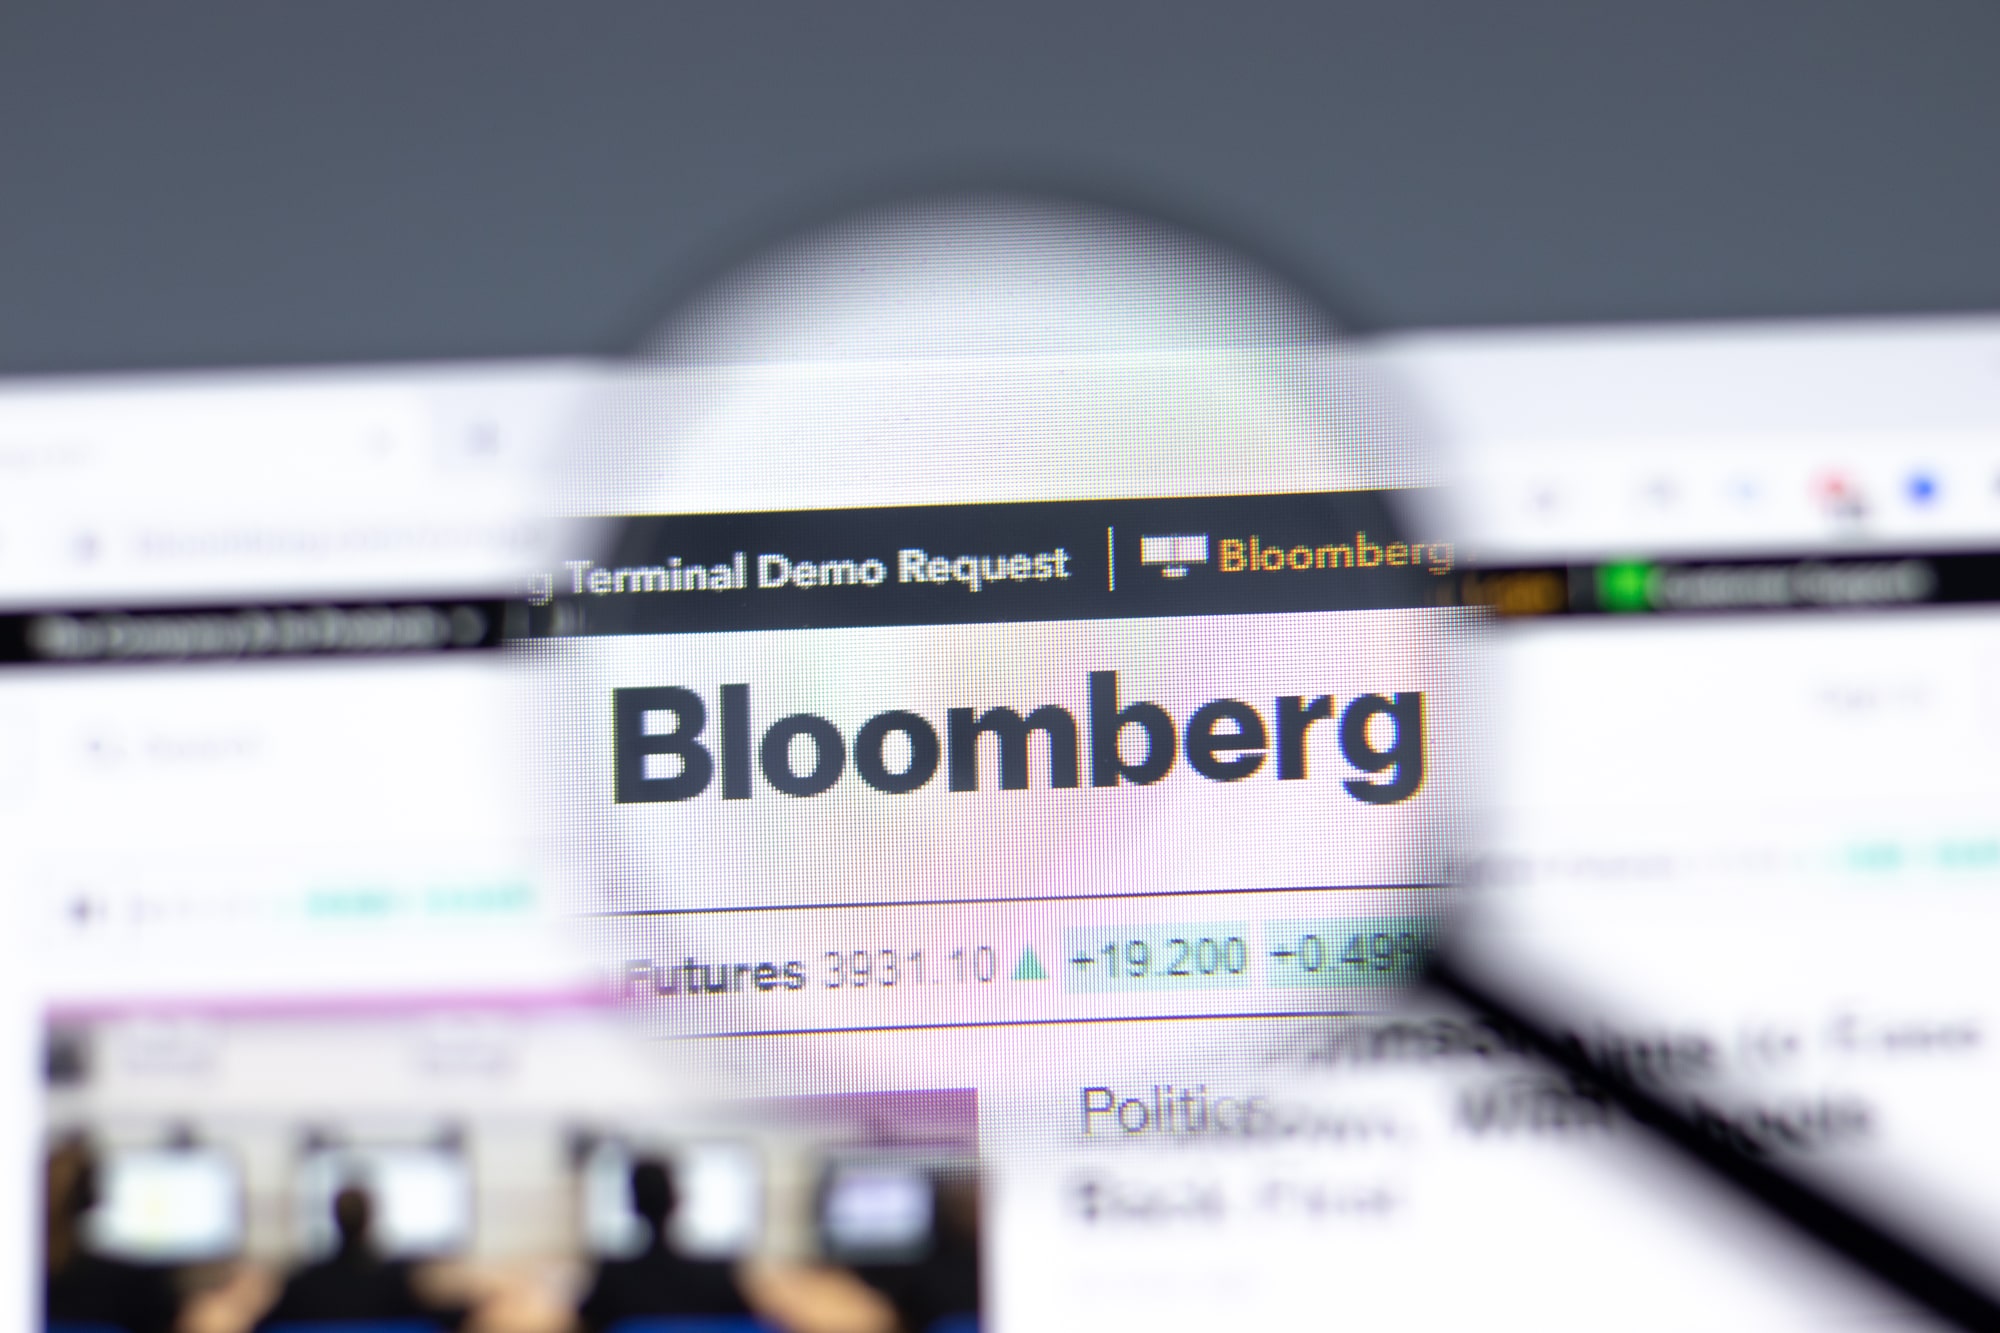 Bloomberg strategist: Bitcoin to become a global reserve asset reaching $100,000